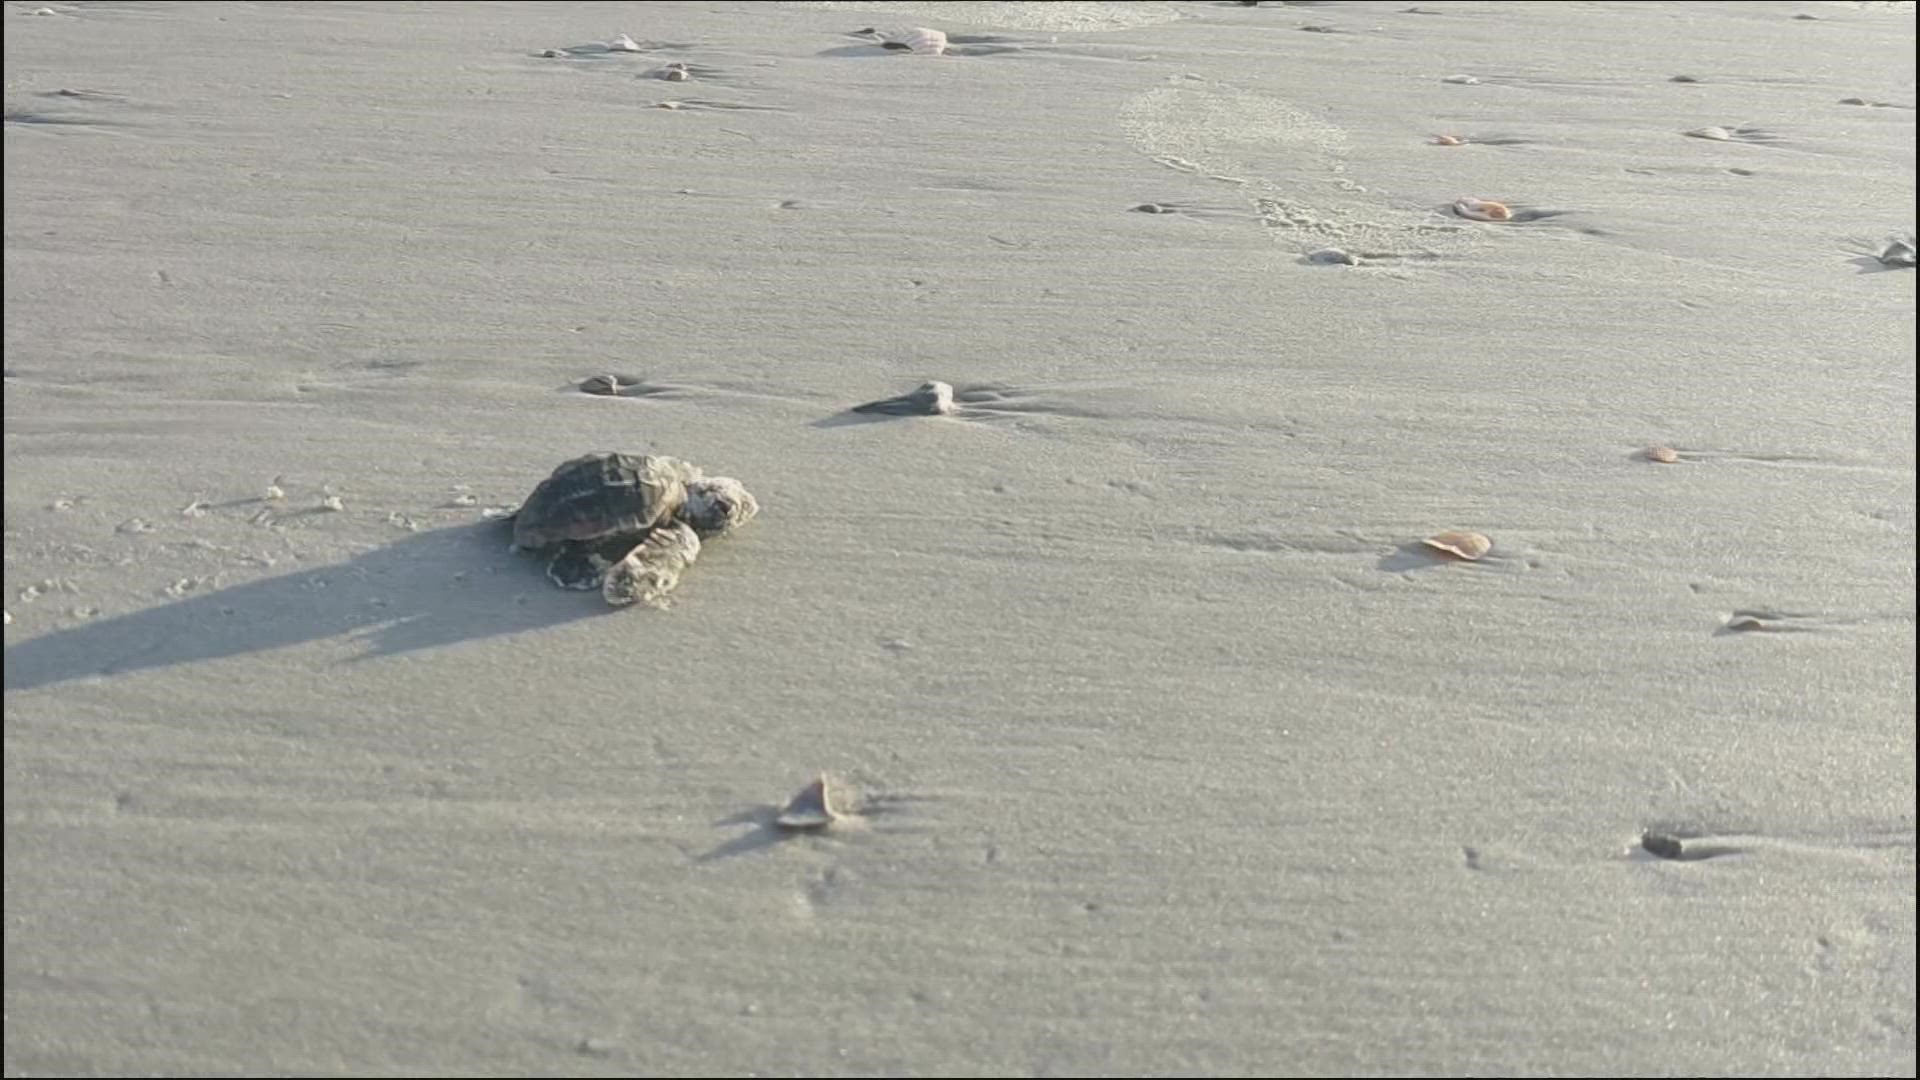 The sea turtle nesting season is coming to an end in October. Naval Station Mayport recorded thousands of turtles hatching on the beach this season.